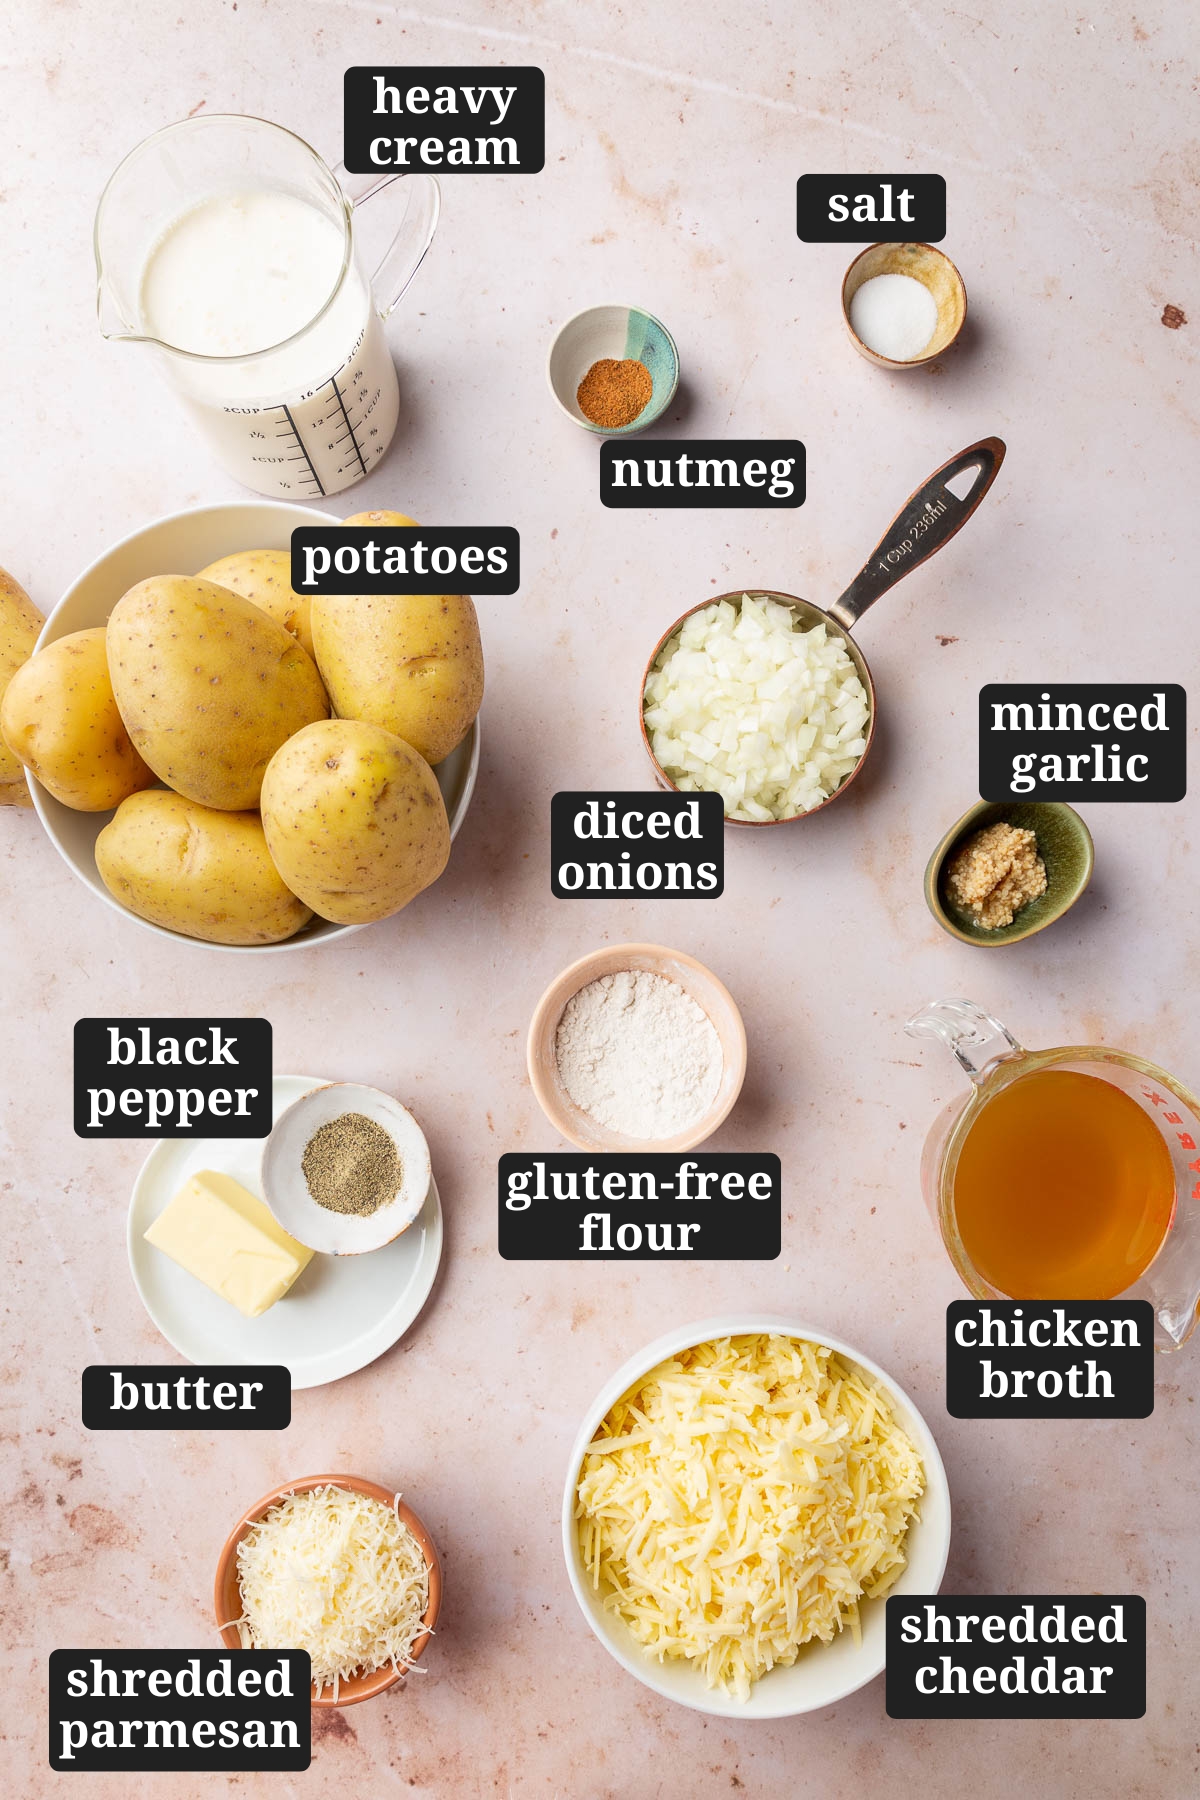 An overhead view of ingredients in small bowls to make gluten free scalloped potatoes including heavy cream, nutmeg, salt, yukon gold potatoes, diced onion, black pepper, butter, gluten-free flour, minced garlic, chicken broth, shredded cheddar cheese and shredded parmesan cheese with text overlays over each ingredient.